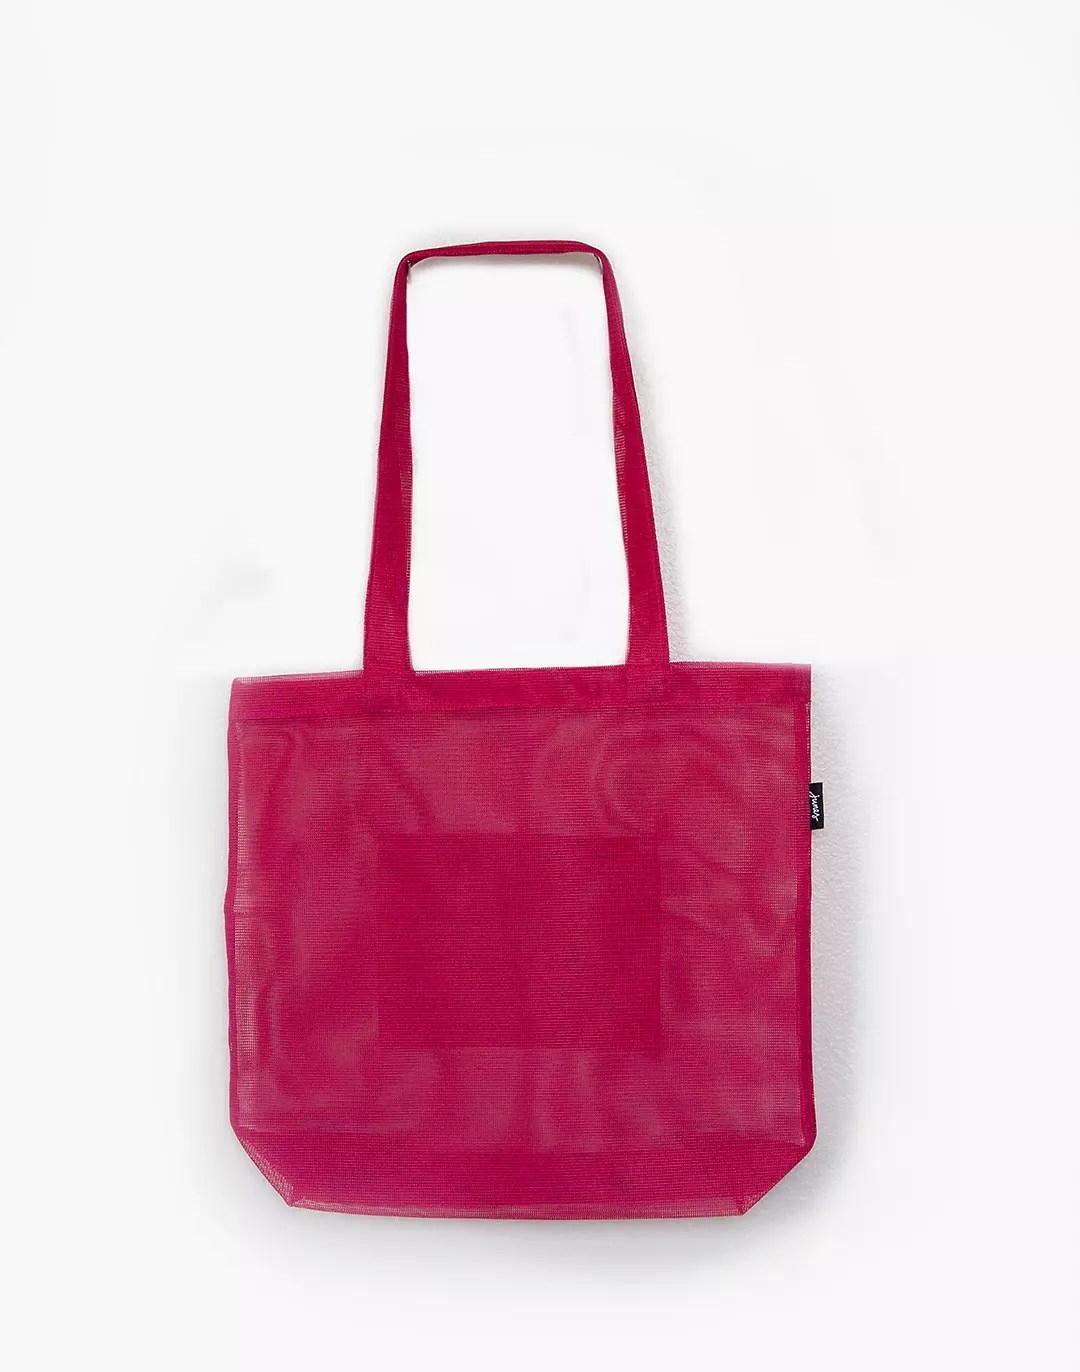 junes market tote in viva magenta on a white background